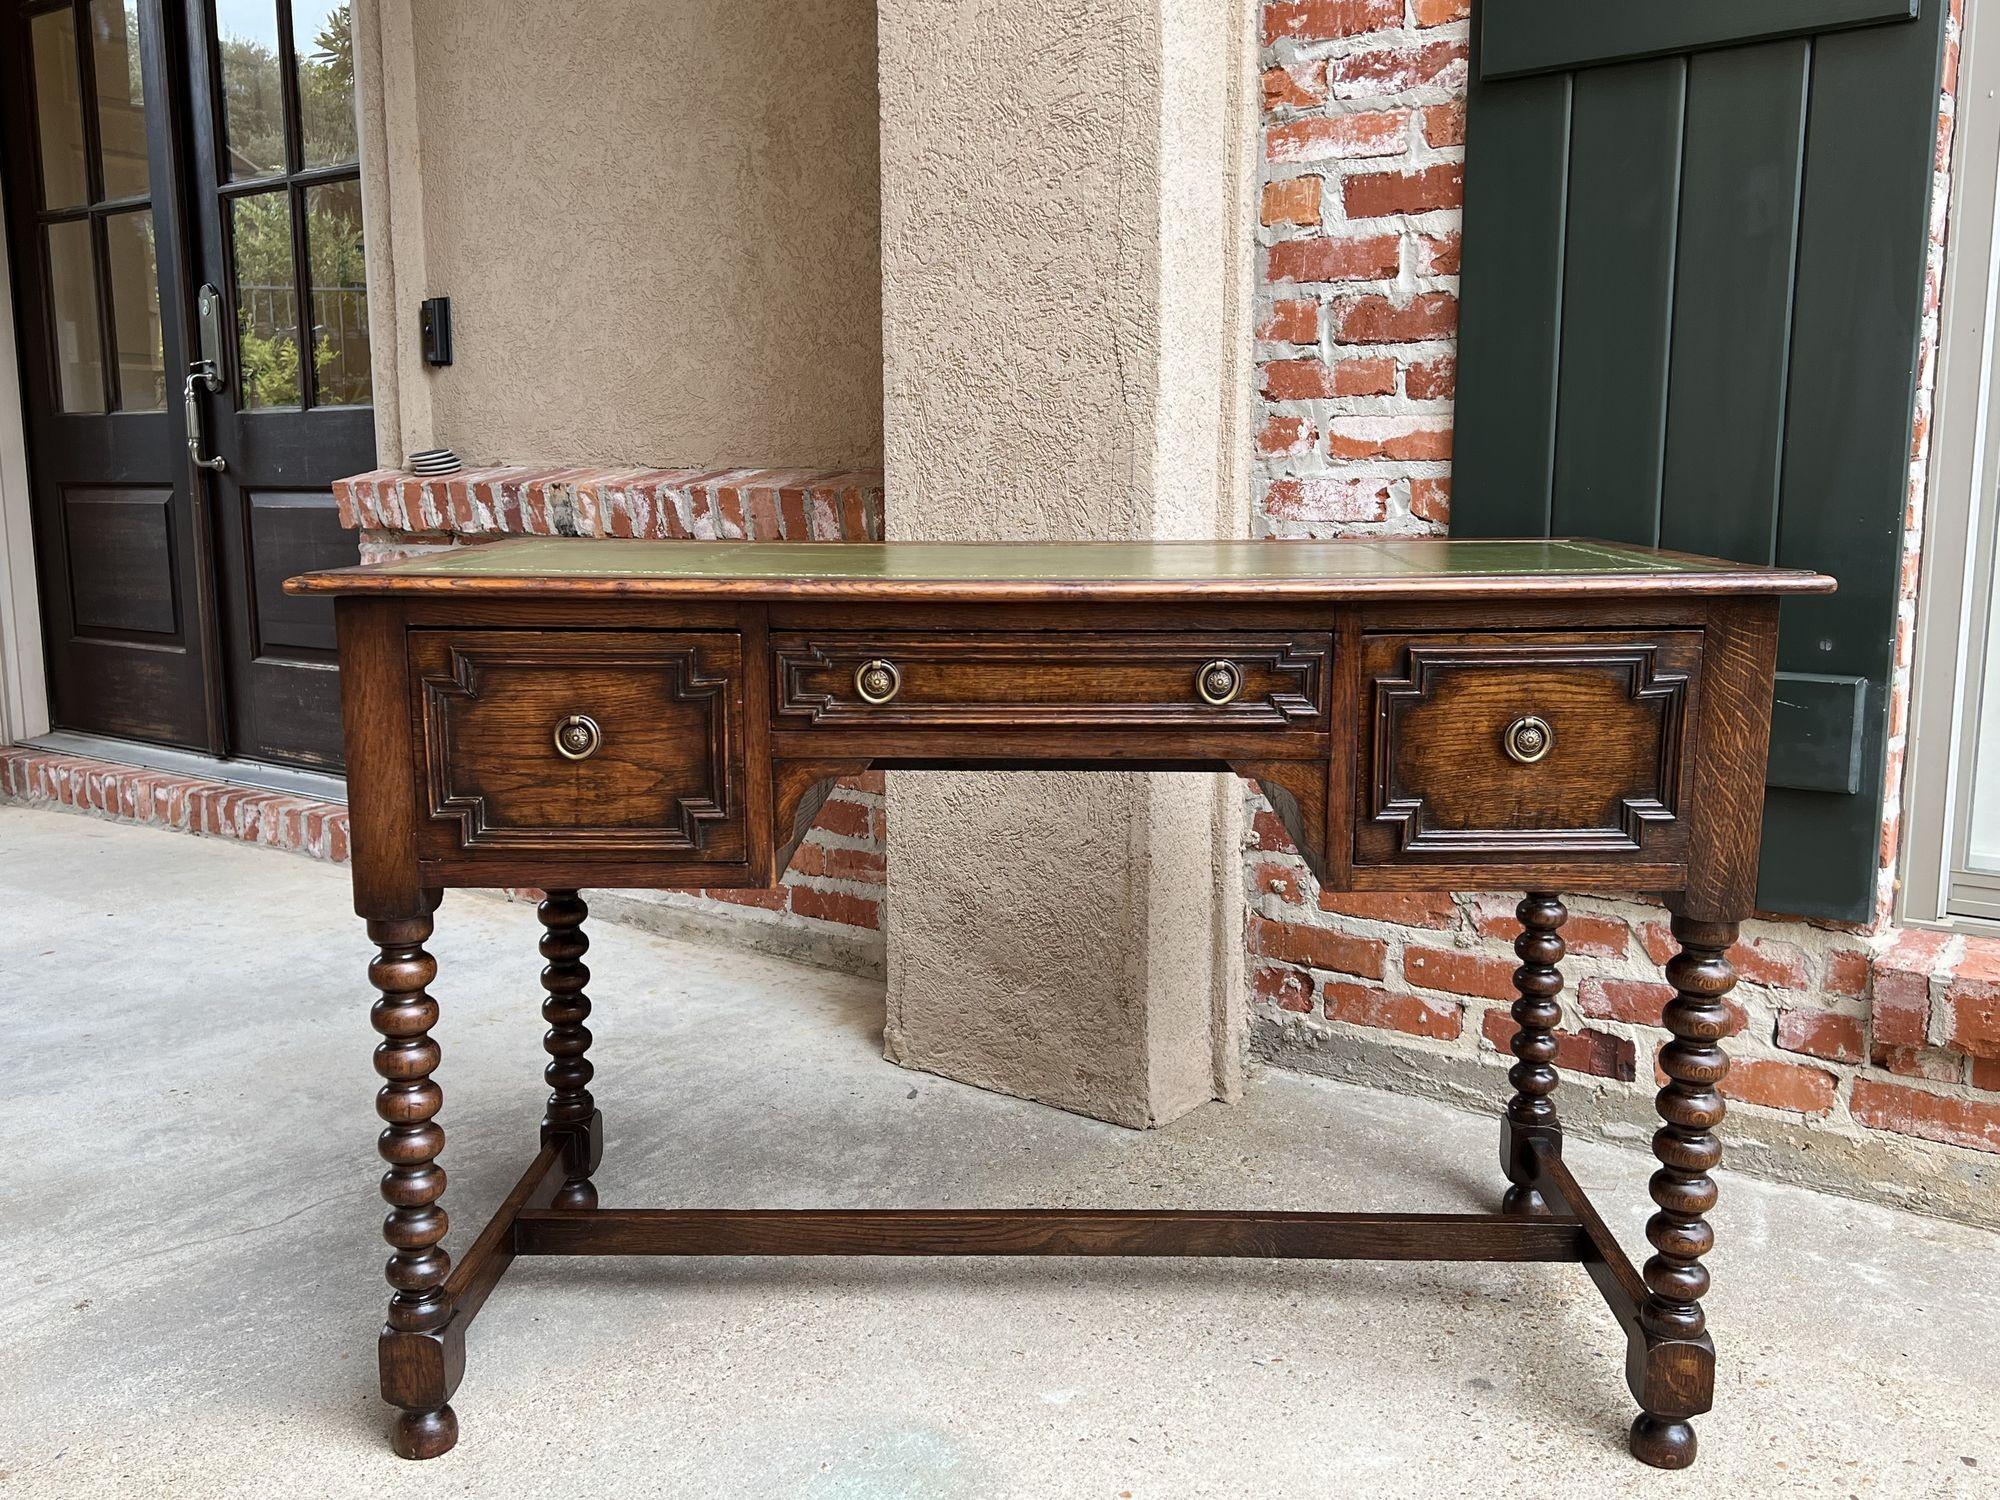 Antique English writing desk table Jacobean carved oak green leather w bobbin legs.

Direct from England, a beautiful antique writing desk in lovely Jacobean style! 
Long center drawer is flanked by wide drawers to either side; all three have